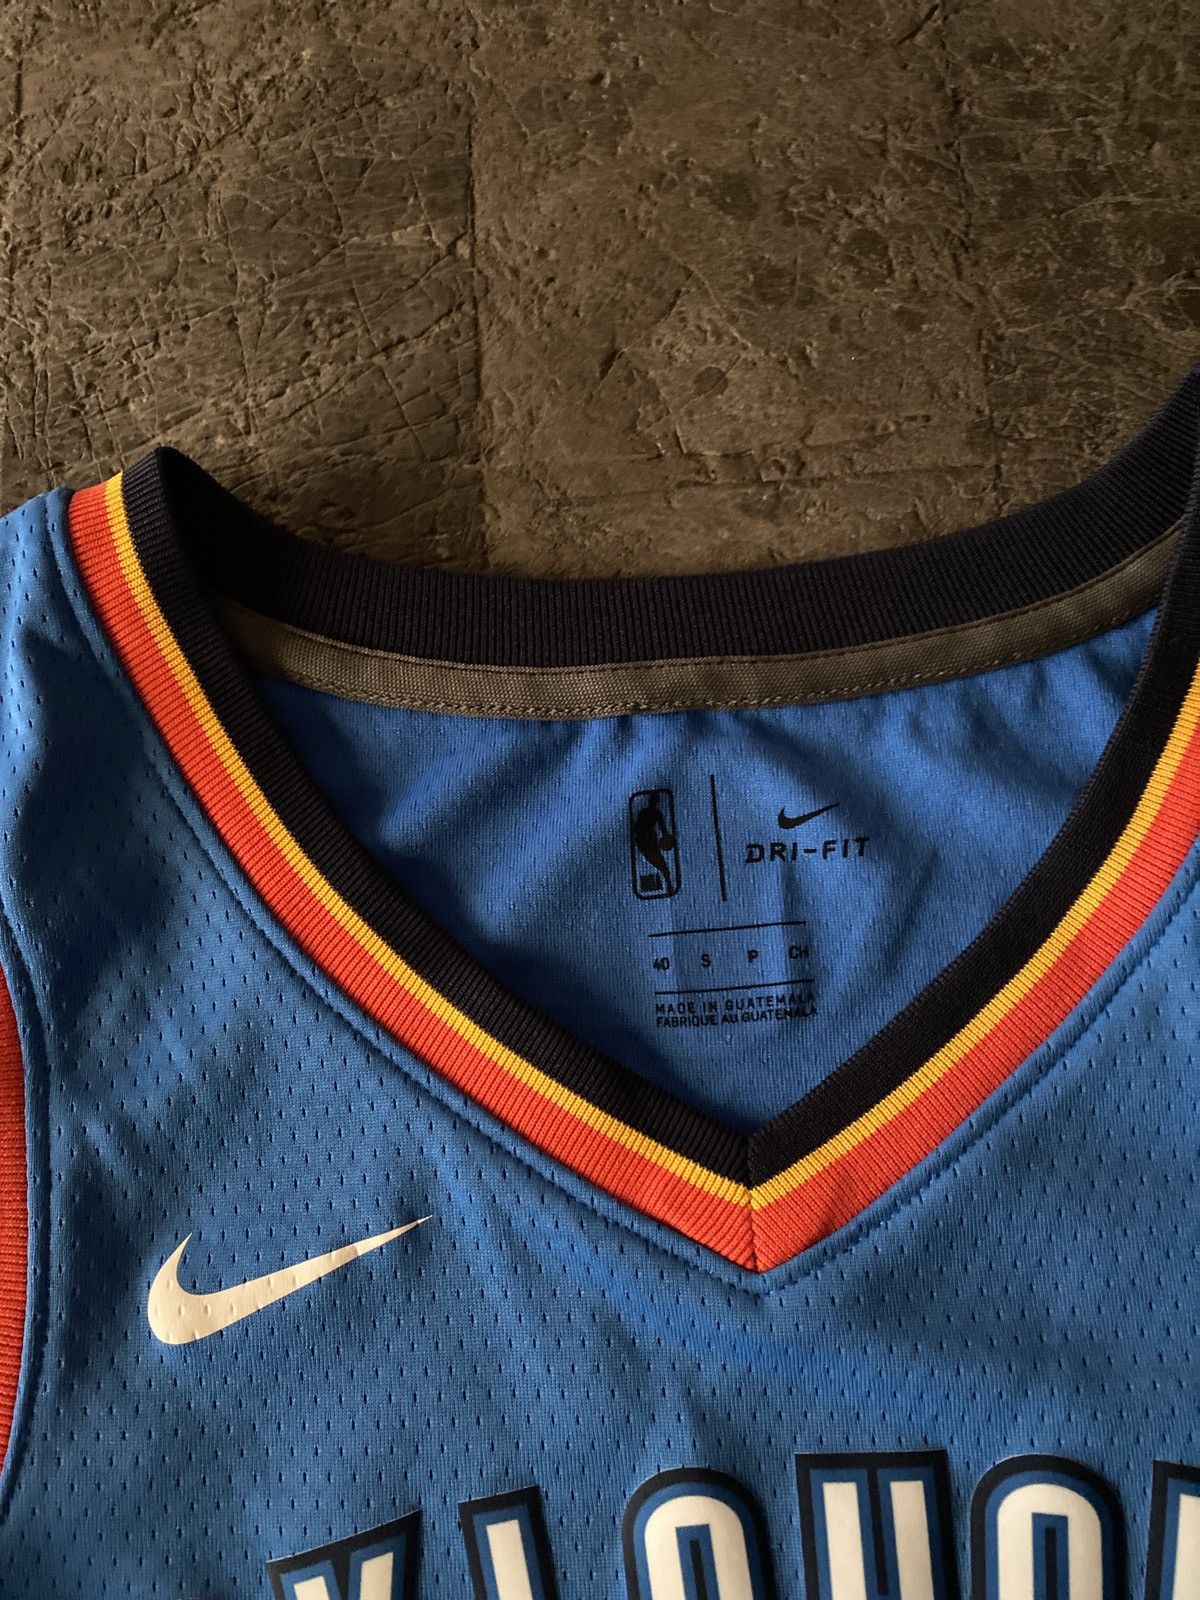 Nike Nike OKC Russell Westbrook Jersey Size US S / EU 44-46 / 1 - 5 Preview